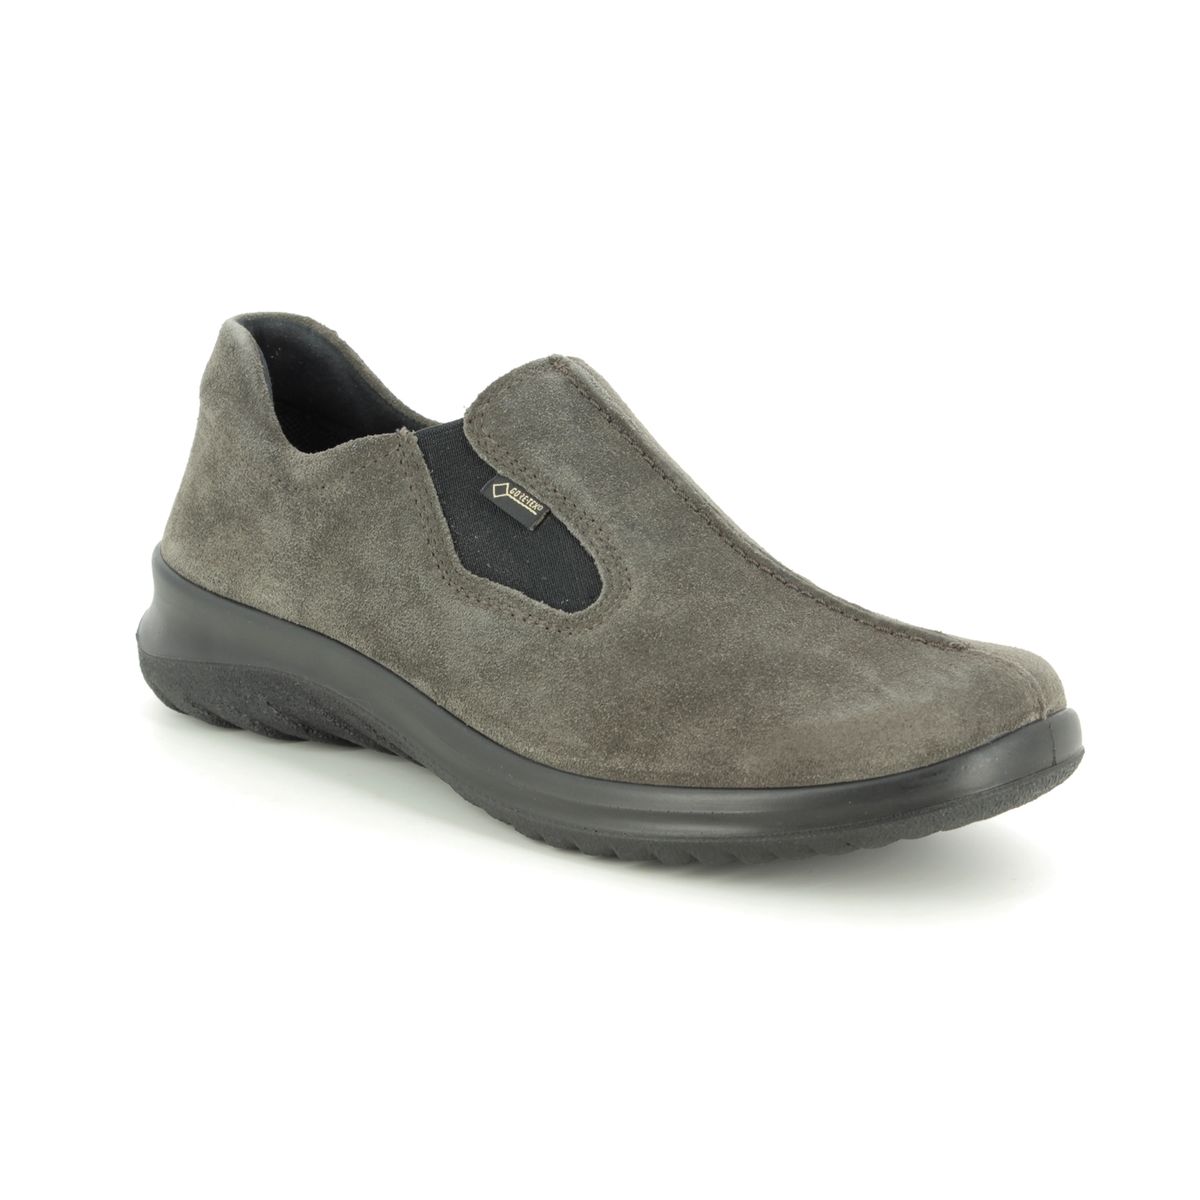 Legero Soft Shoe Gtx Grey Suede Womens Comfort Slip On Shoes 09568-28 In Size 6.5 In Plain Grey Suede